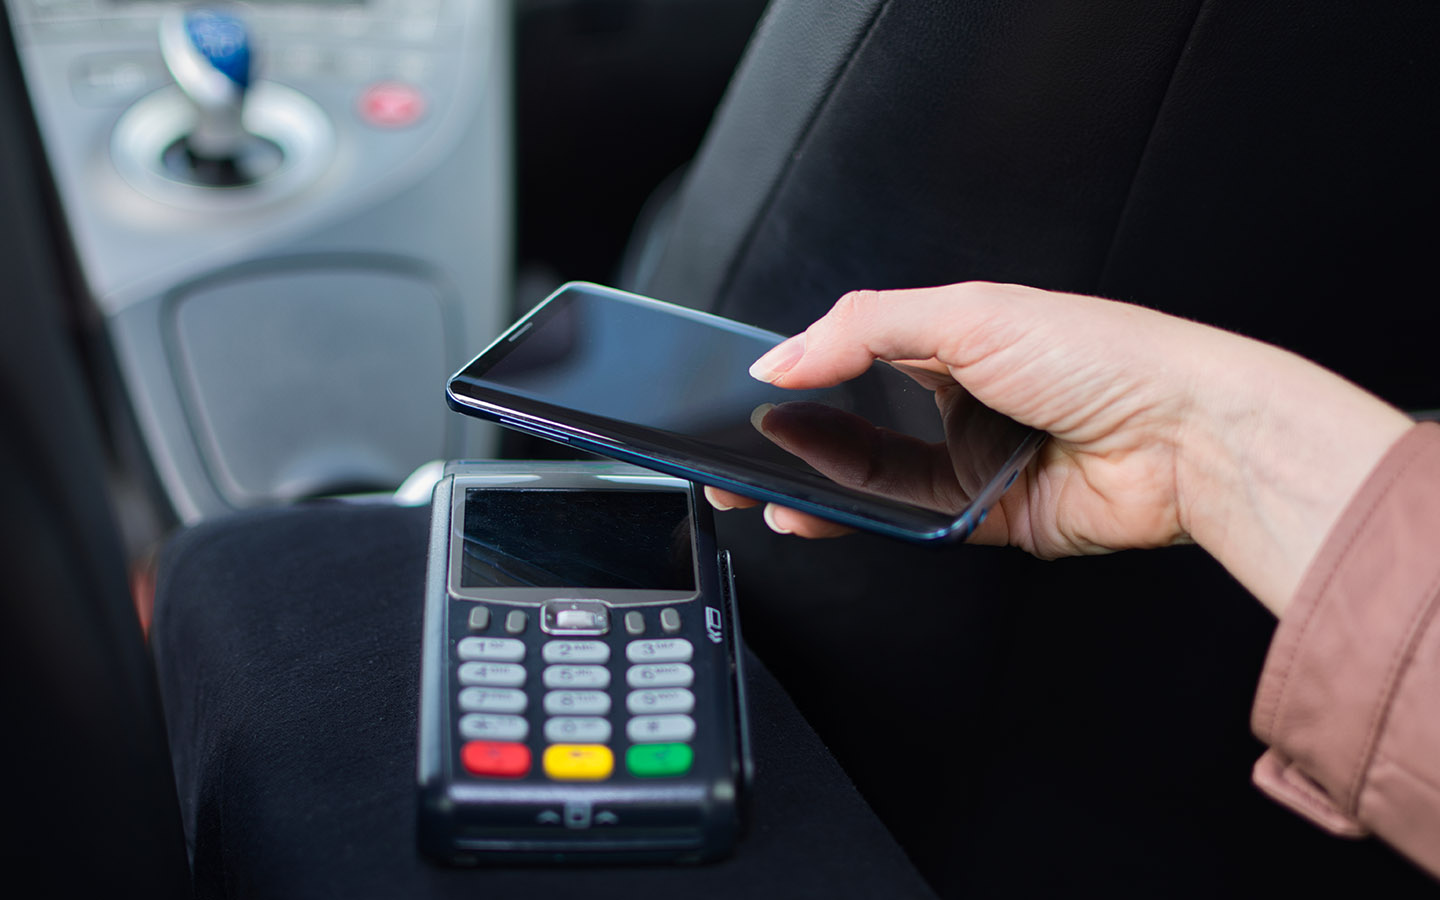 ITC electronic payments for Taxis in Abu Dhabi via the Alipay+ App is a smart payment method